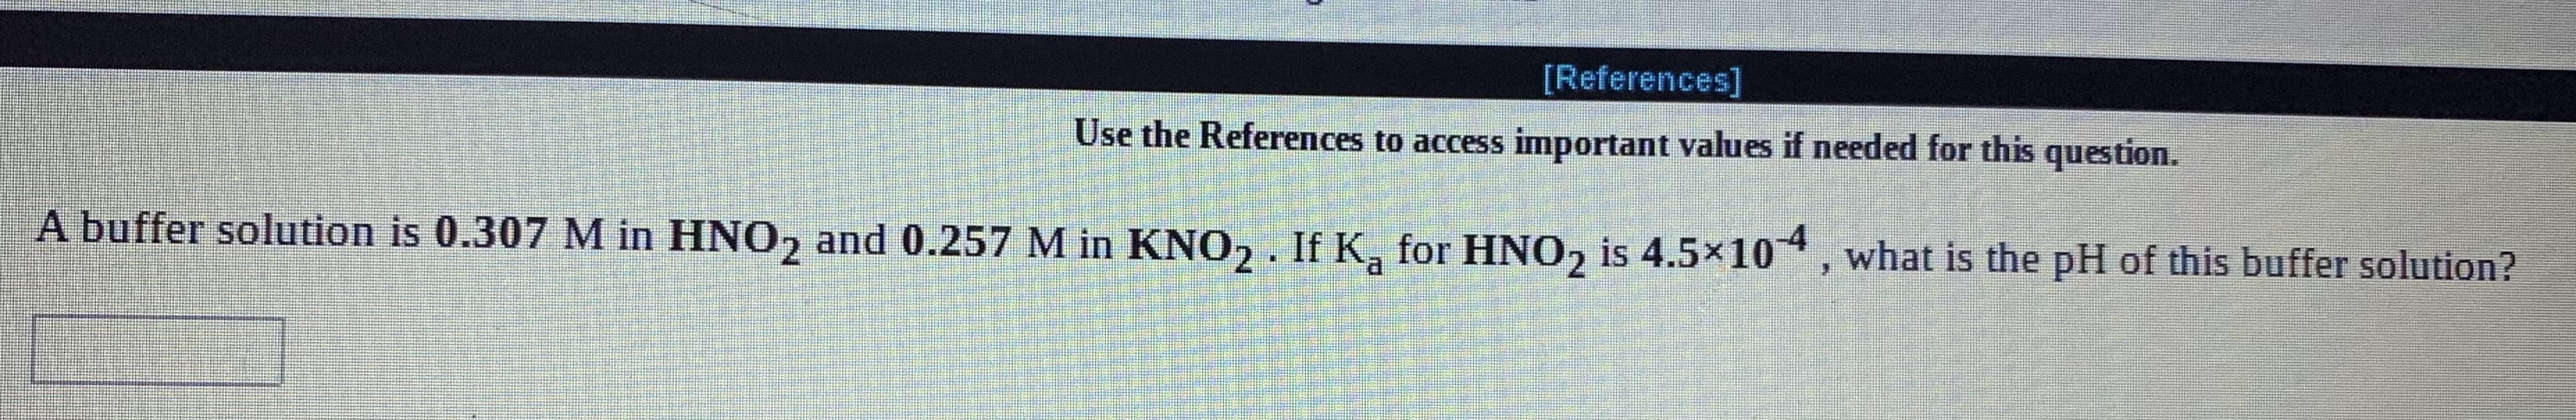 [References]
Use the References to access important values if needed for this question.
A buffer solution is 0.307 M in HNO, and 0.257 M in KNO2 . If K, for HNO, is 4.5×104, what is the pH of this buffer solution?
